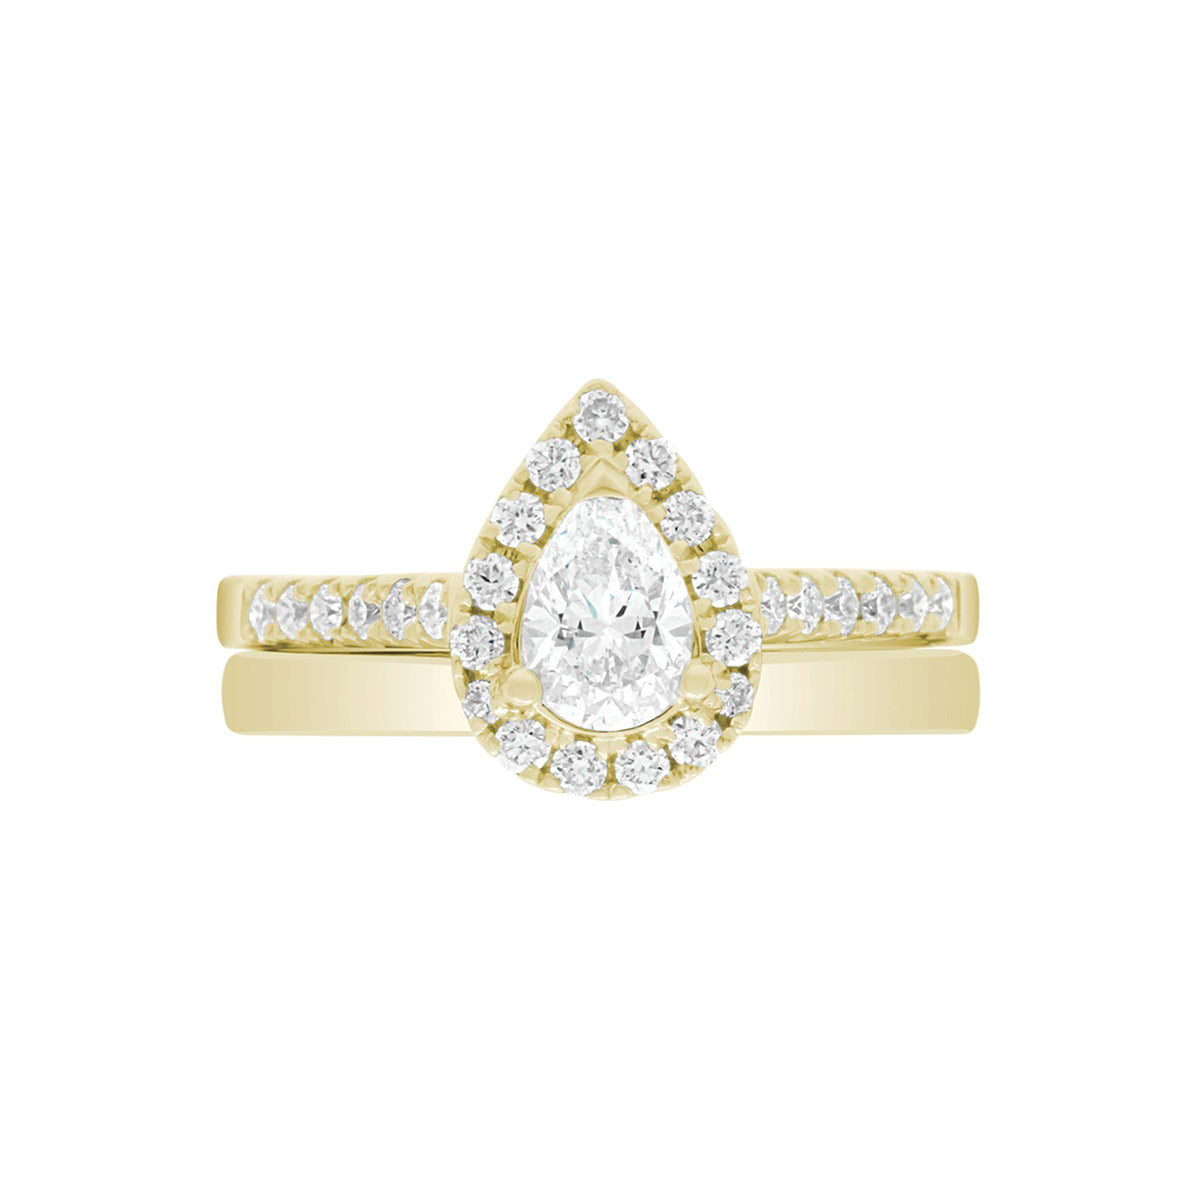 Pear Cut Halo Ring in yellow gold, laying flat with a matching yellow gold wedding band,on A WHITE SURFACE WITH A WHITE BACKGROUND